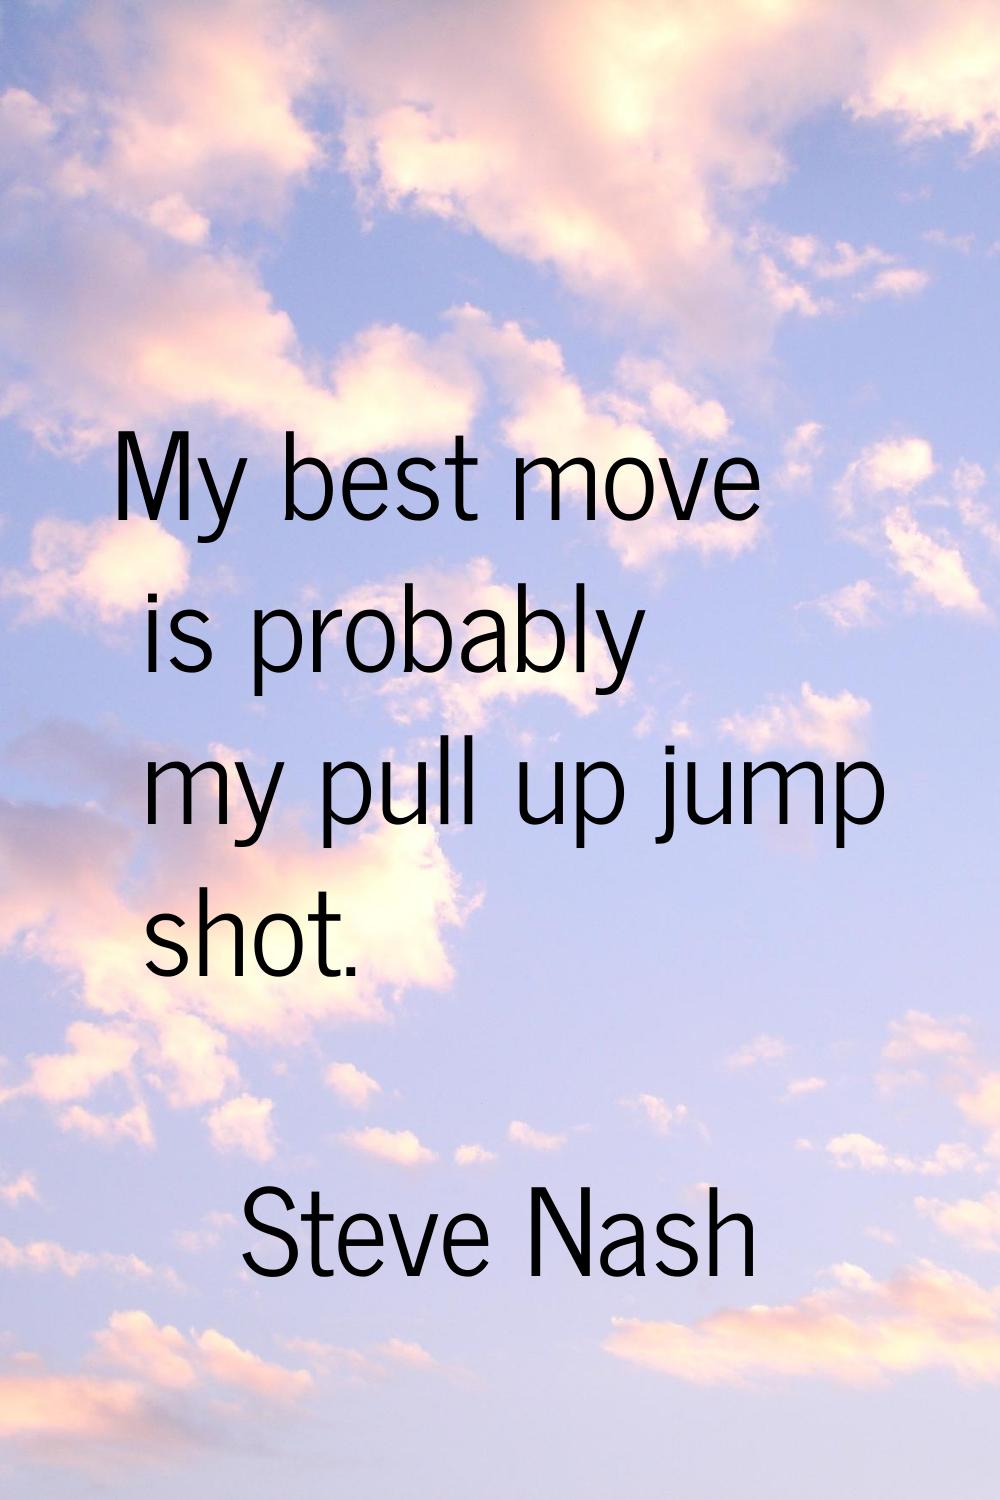 My best move is probably my pull up jump shot.